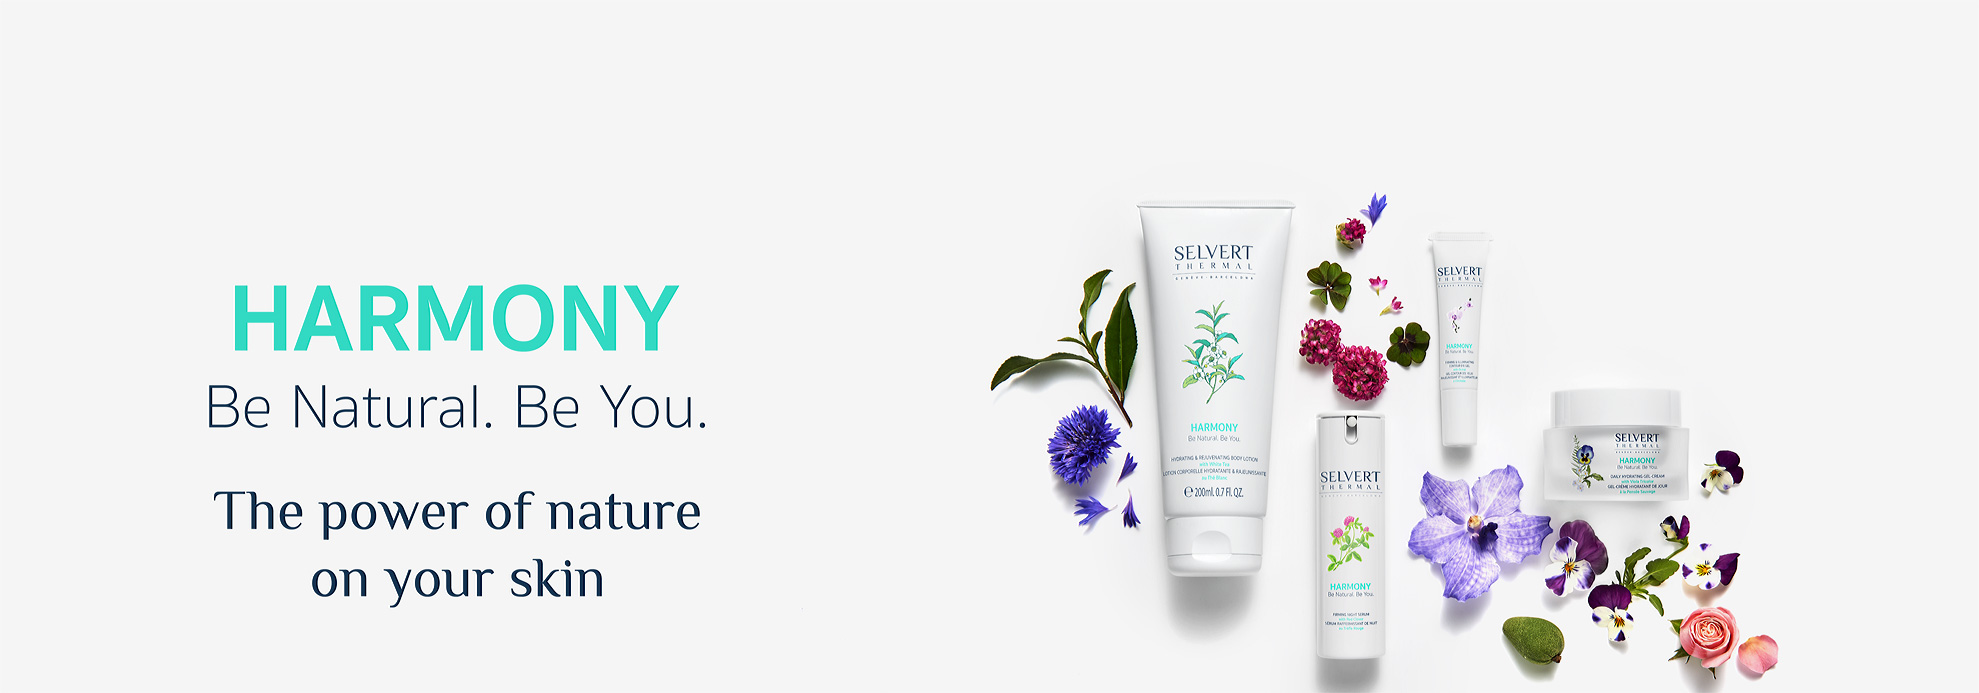 HARMONY <h4 style="text-align: center;">THE POWER OF NATURE ON YOUR SKIN</h4>
<p style="text-align: justify;">&nbsp;</p>
<p style="text-align: justify;">Harmony by SELVERT THERMAL is a line inspired by the virtues and numerous beneficial properties of natural active ingredients which, together with the most advanced and effective science, help to combat premature skin ageing in all skin types, providing extraordinary results.</p>
<p style="text-align: justify;">With a formula that contains over 95%* precious natural ingredients, such as Orchid, Blue Lotus Flower or Red Clover and subtle and fresh essences, Harmony is the perfect ally for the modern woman.</p>
<p style="text-align: justify;">*According to the criteria established in ISO 16128 on cosmetics made with natural ingredients.</p>